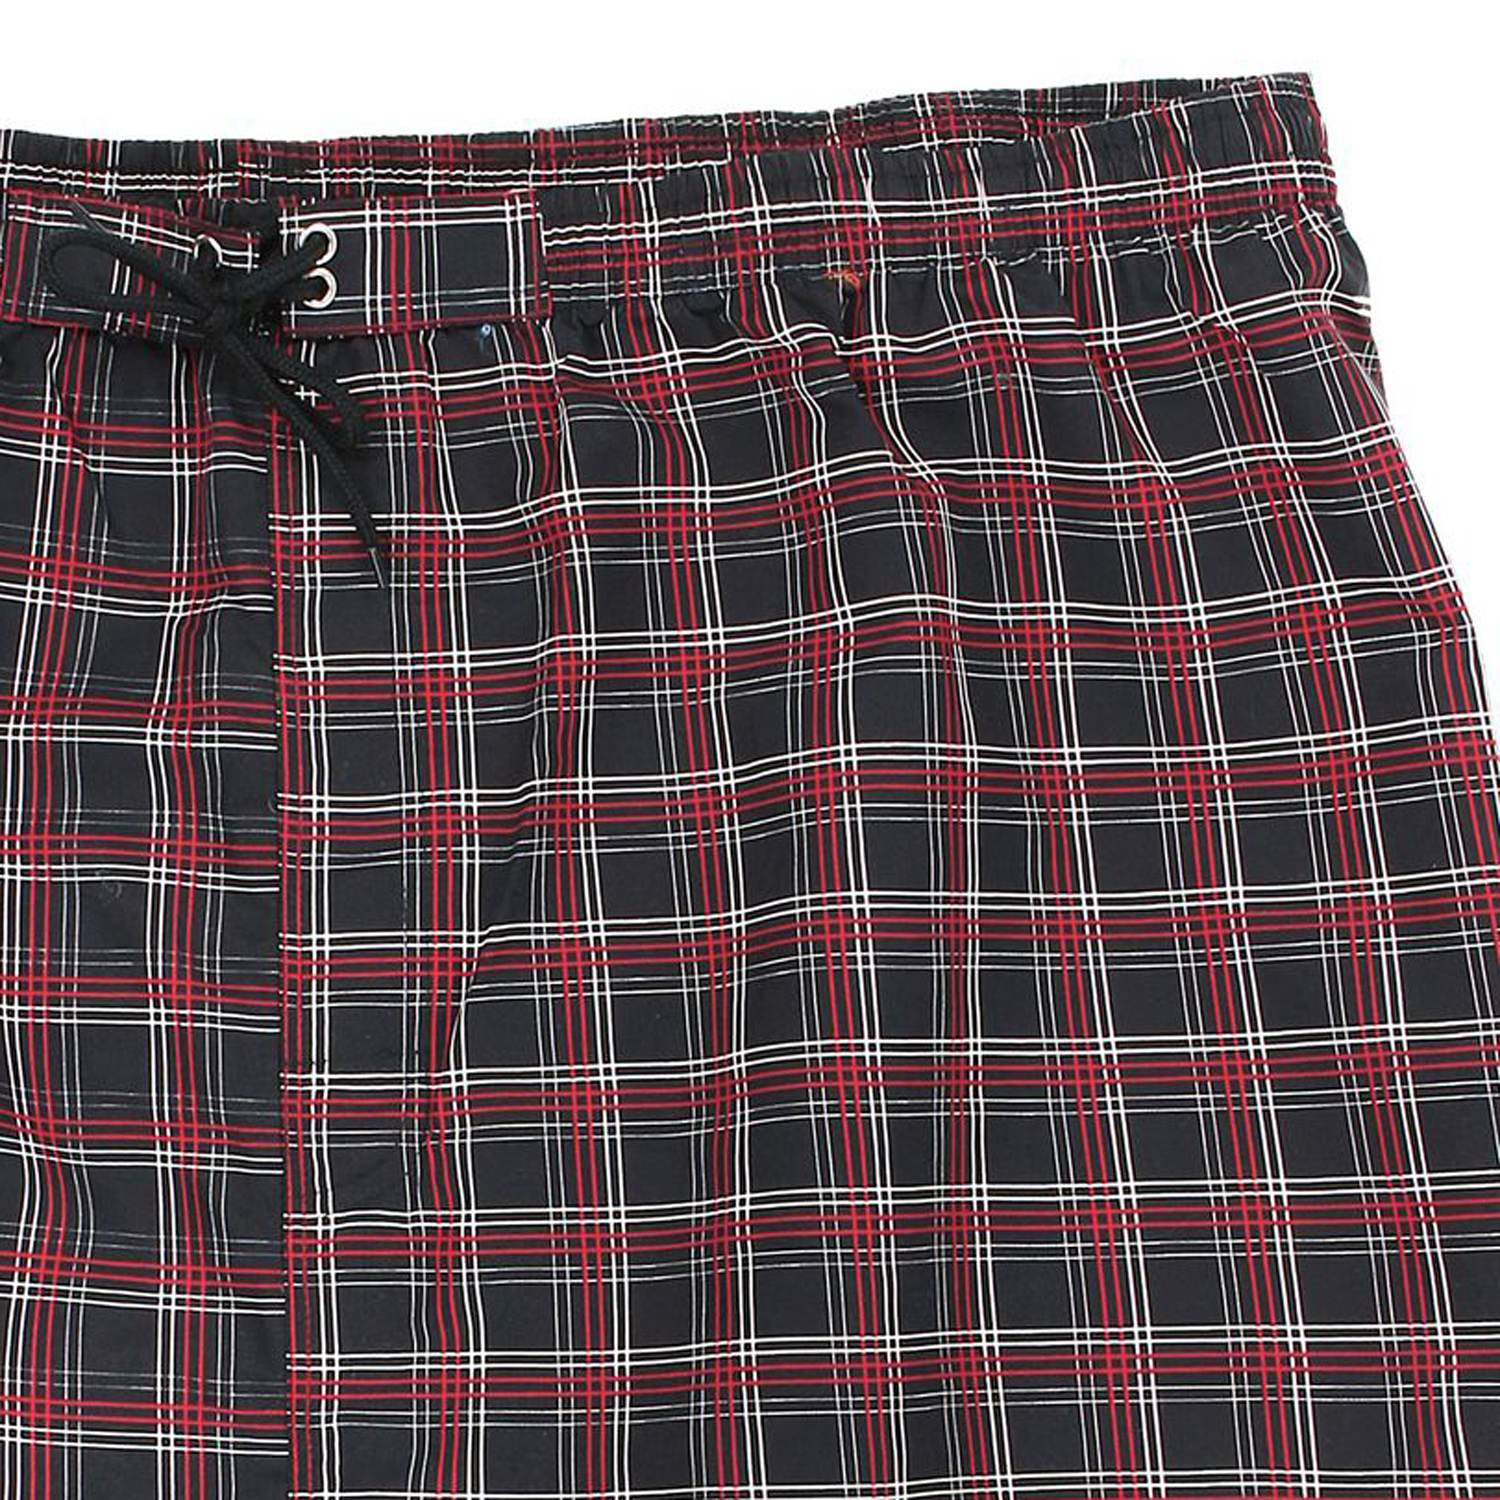 Swimming trunks in black-red-white-checked by eleMar up to oversize 10XL